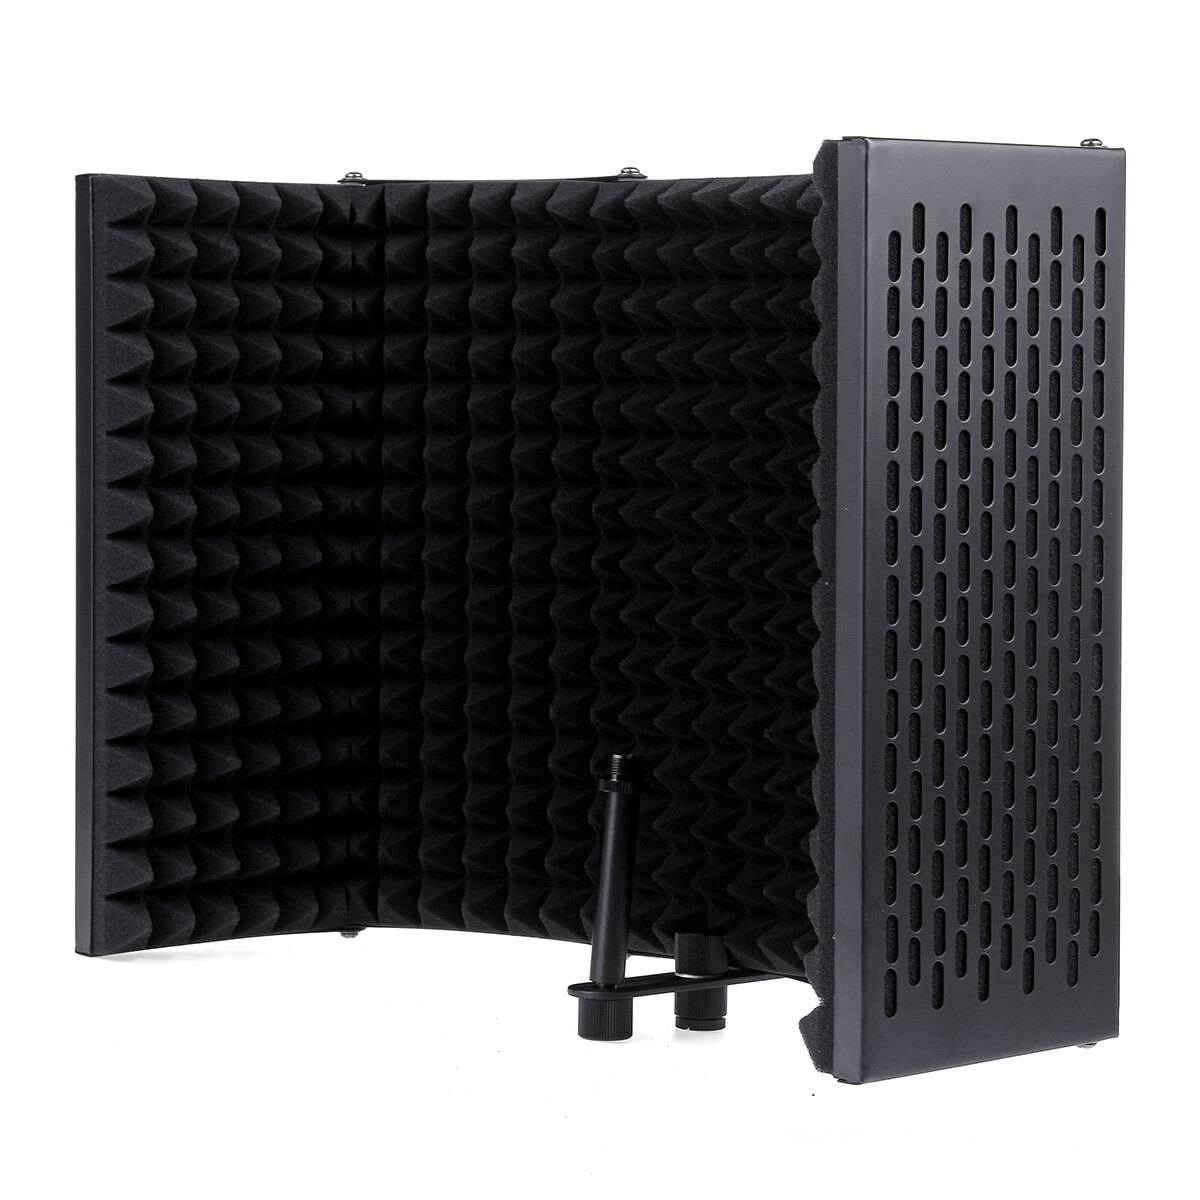 5 Panel Foldable Studio Microphone Isolation Shield Recording Sound Absorber Foam Panel Support Brac